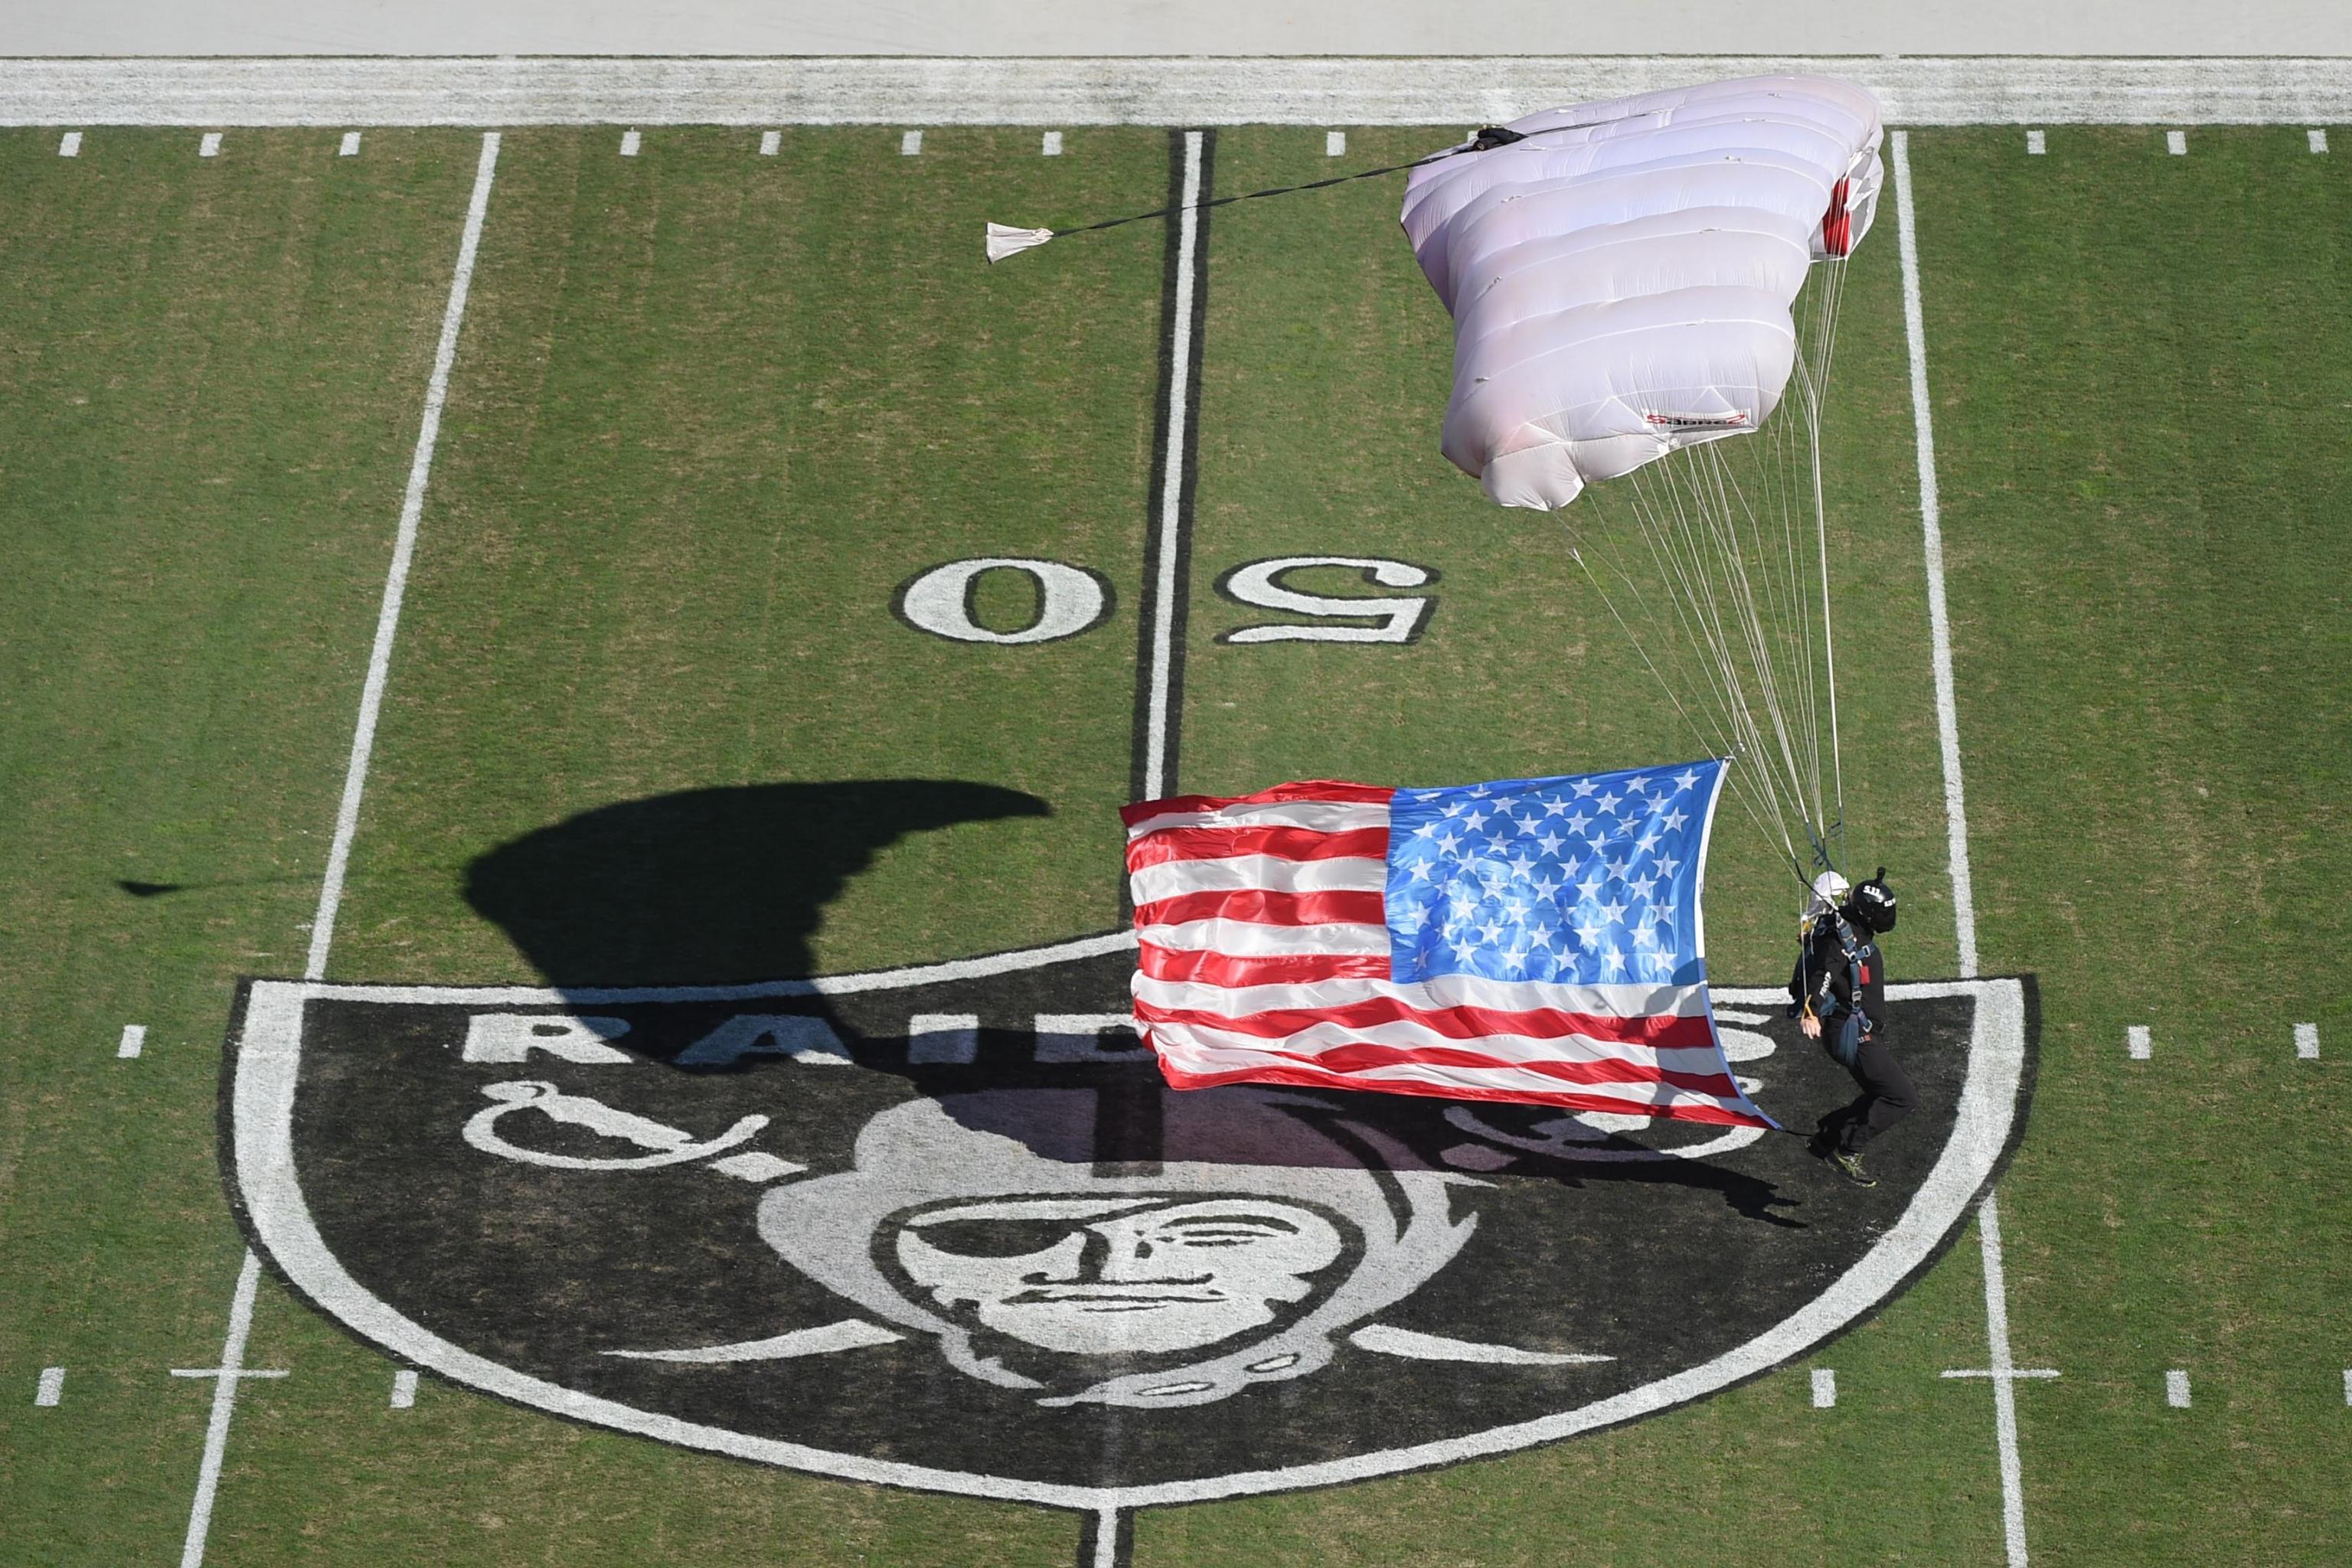 Stadium Authority approves lease agreement with Raiders, keeping